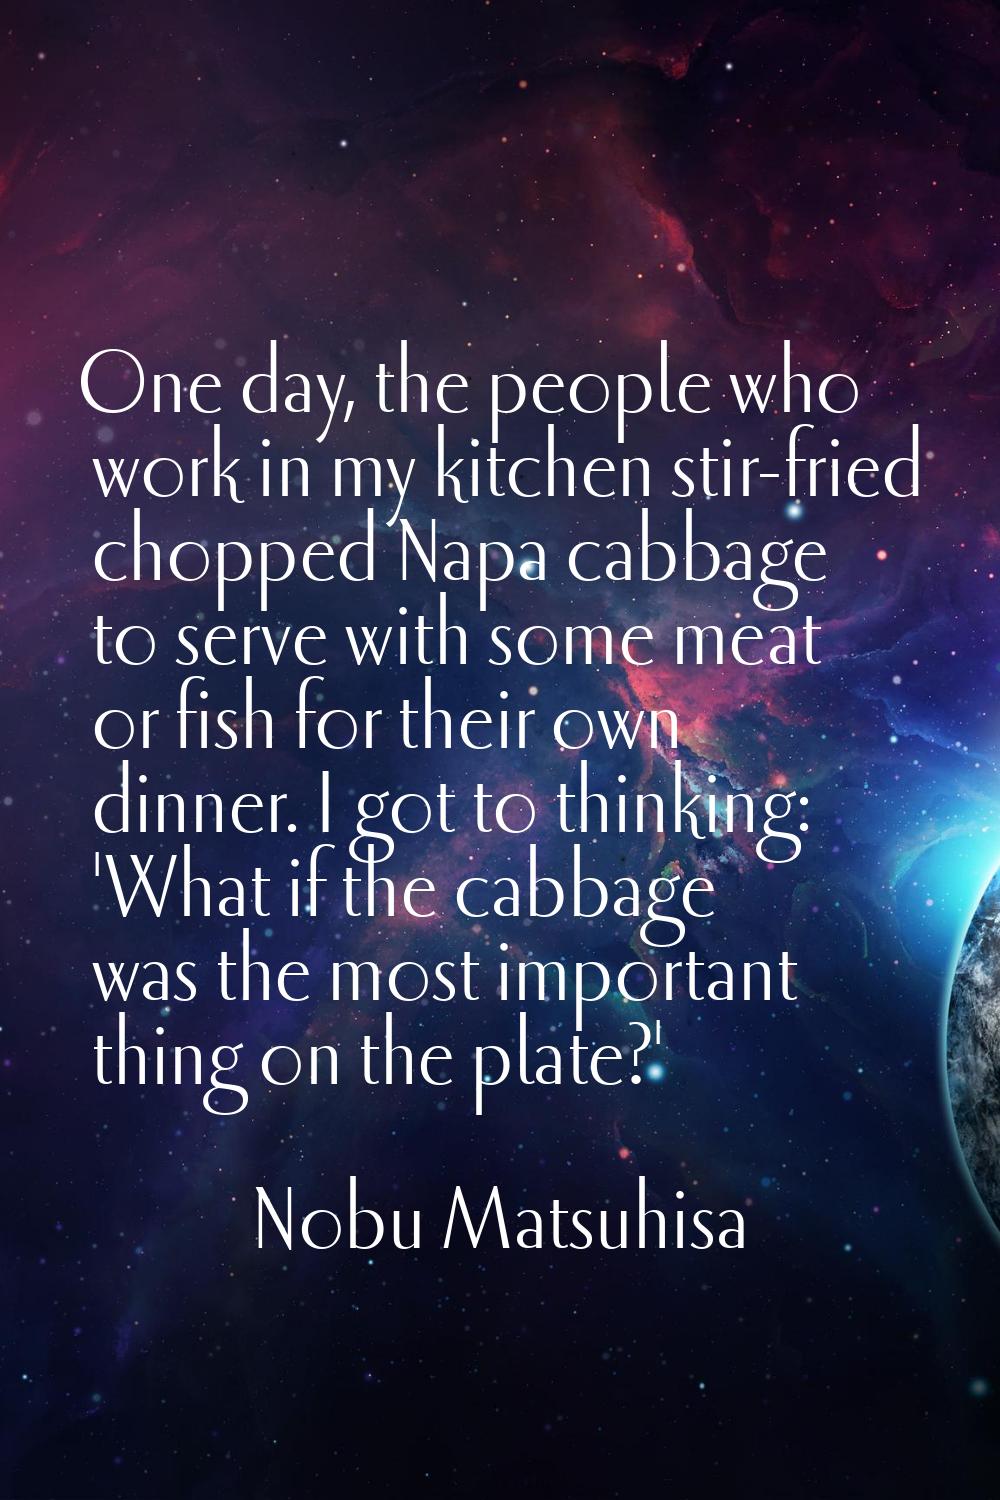 One day, the people who work in my kitchen stir-fried chopped Napa cabbage to serve with some meat 